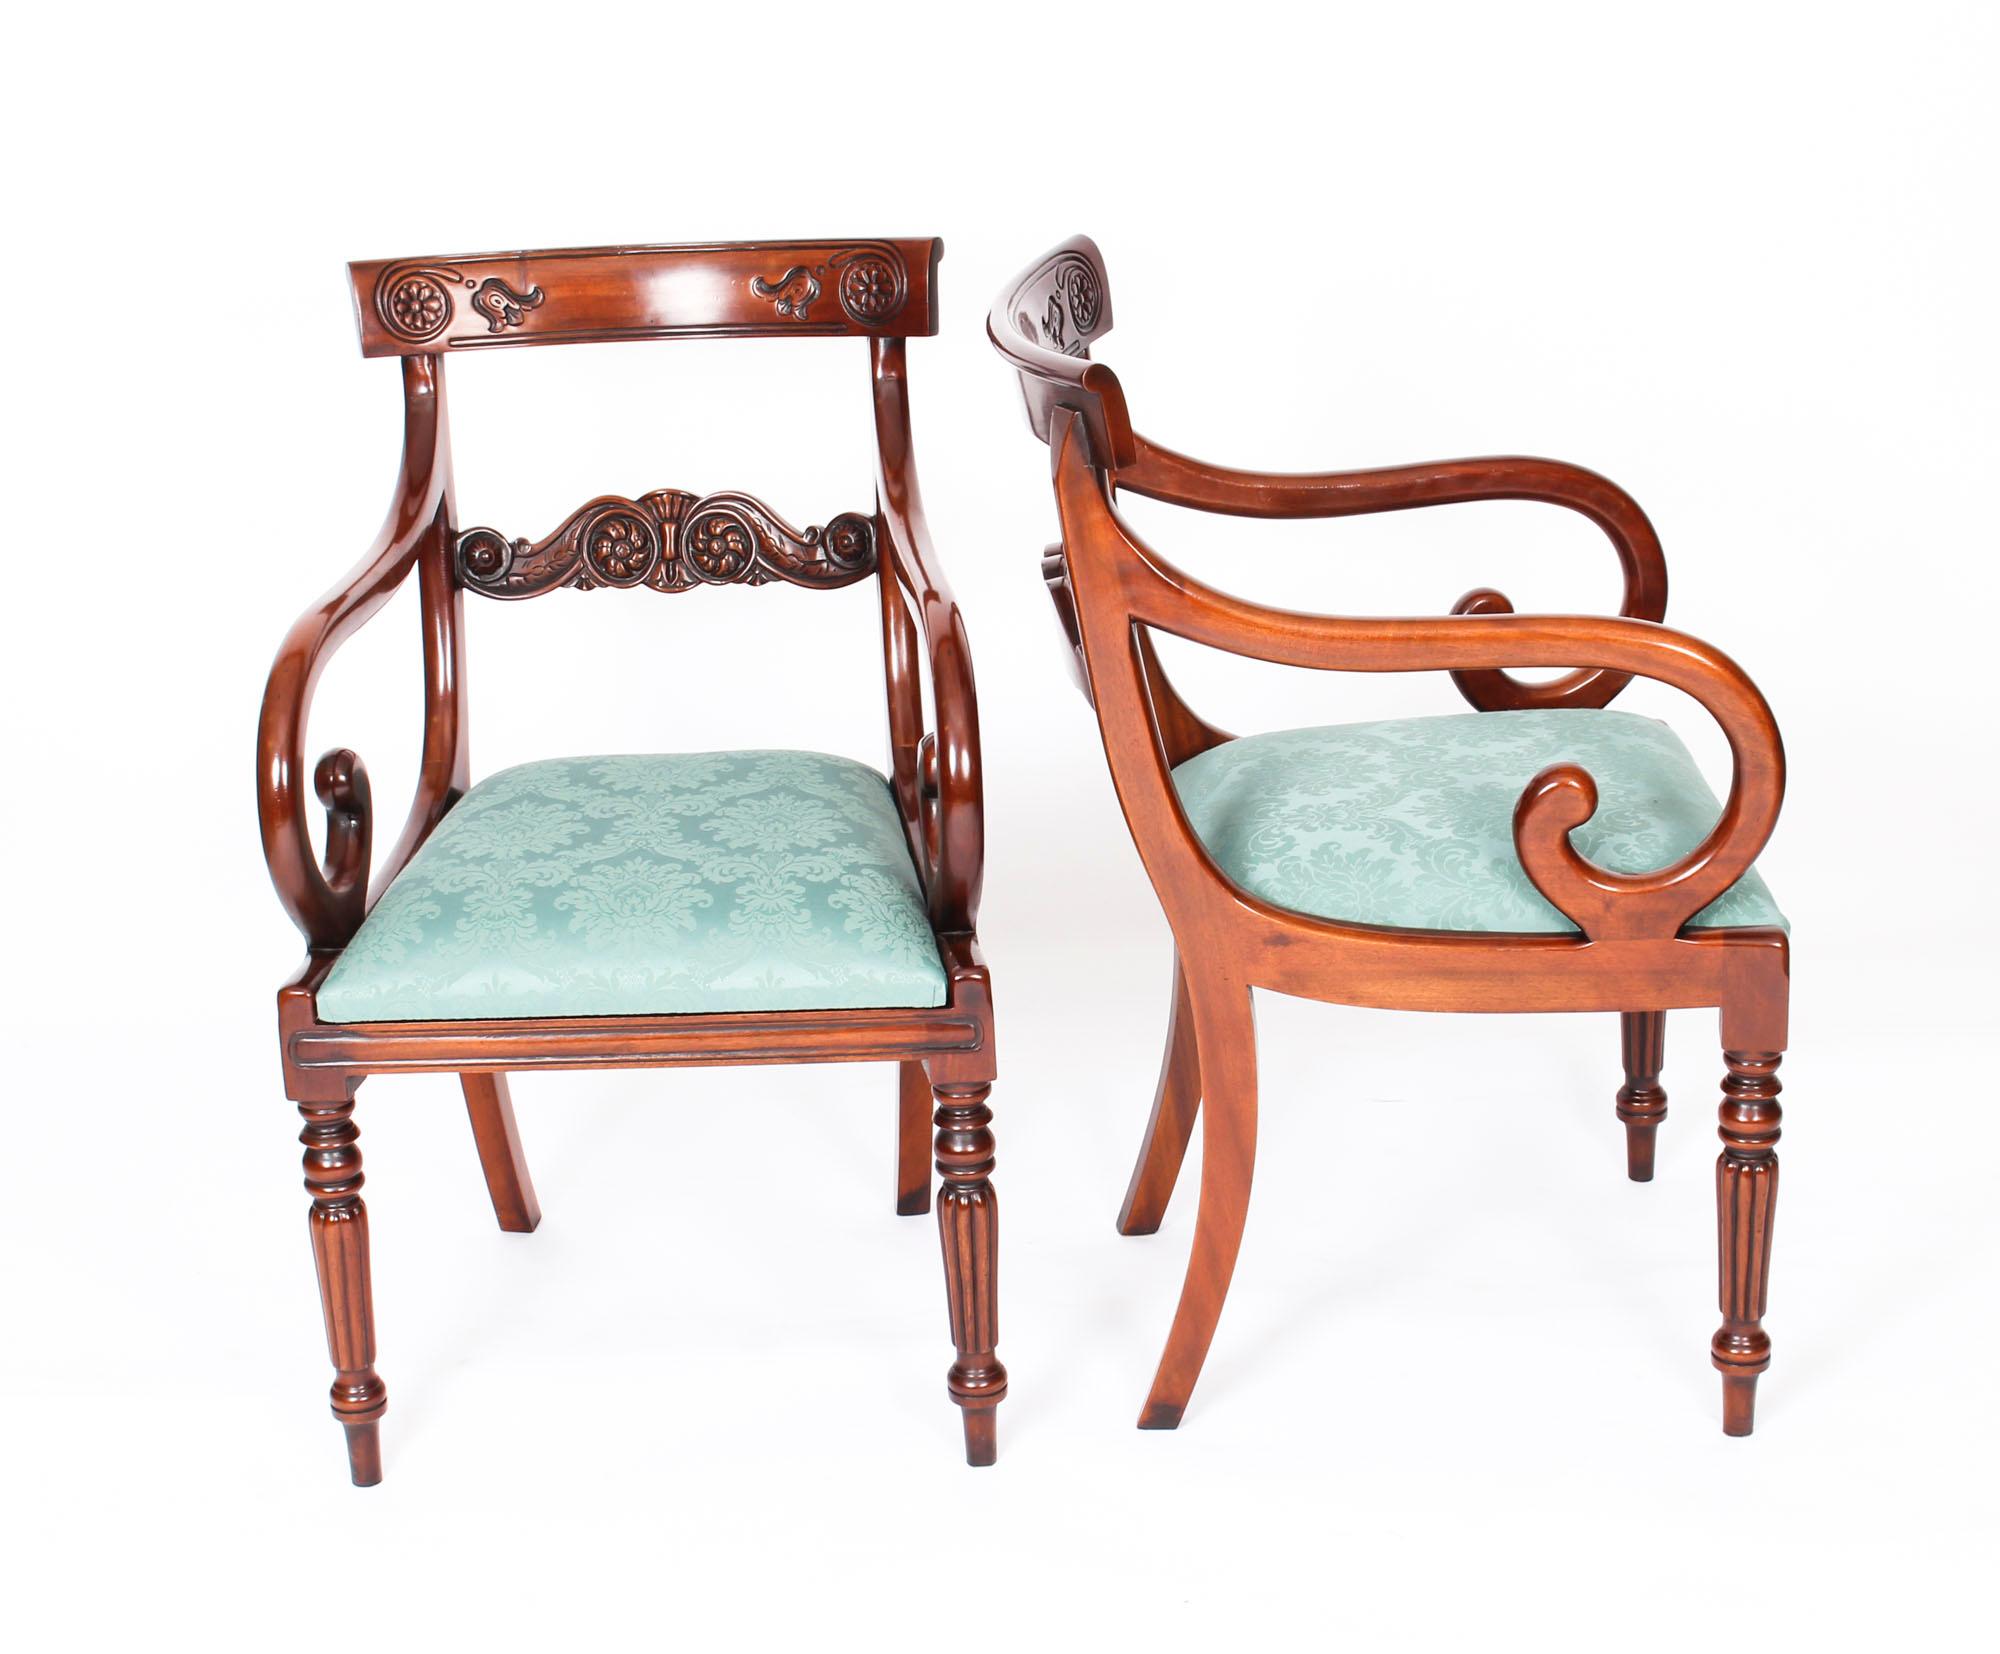 An absolutely fantastic vintage set of twelve Regency revival bar back dining chairs dating from the late 20th century.

Masterfully handcrafted in beautiful solid flame mahogany, the finish and attention to detail on display are truly